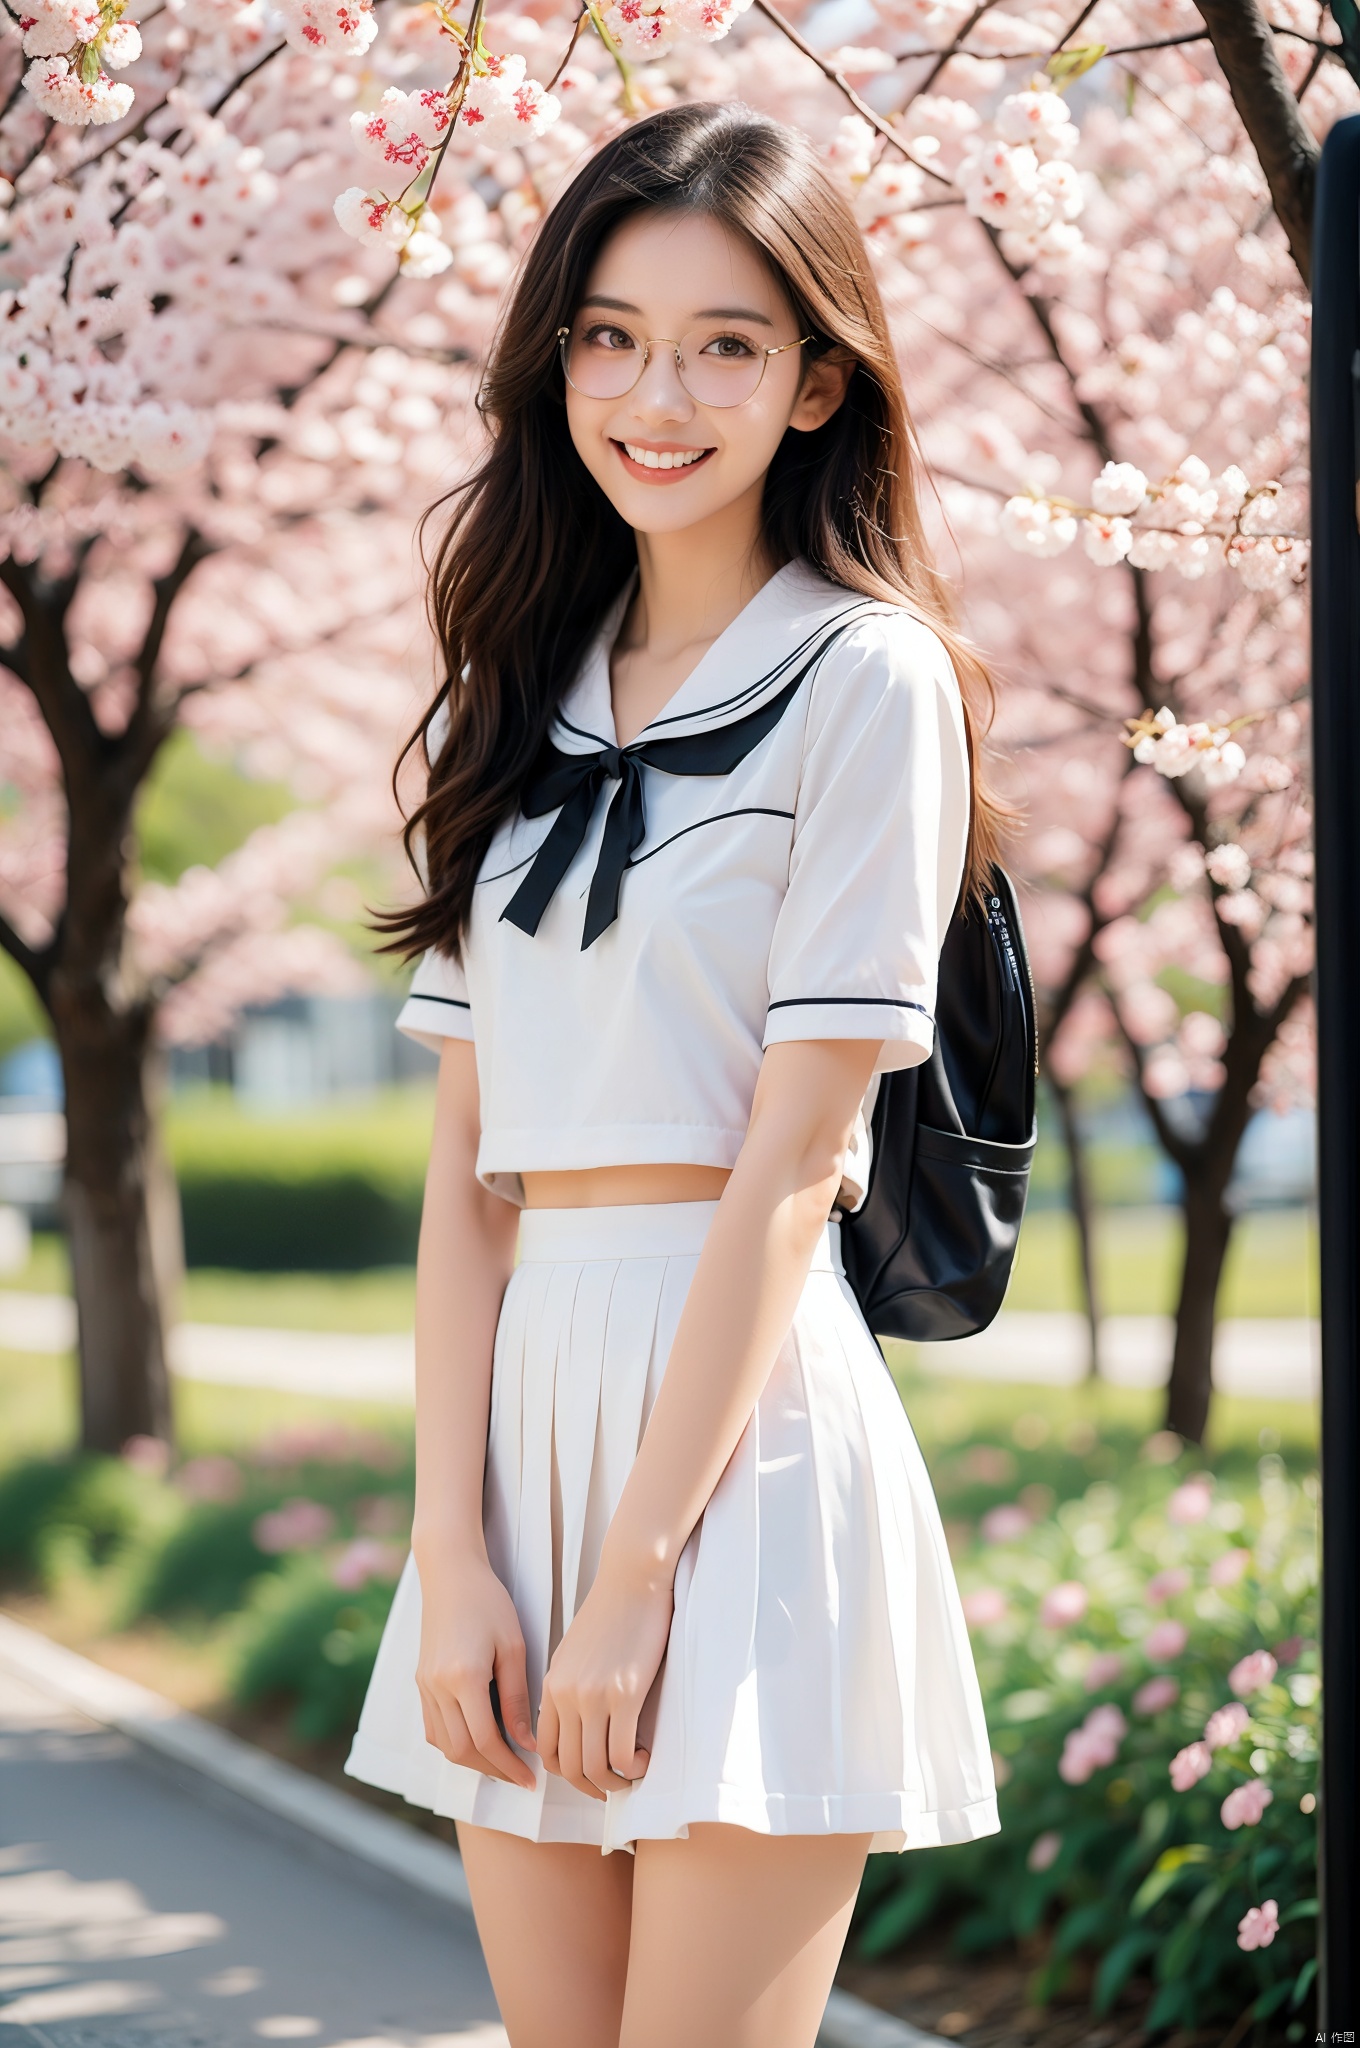 A Japanese schoolgirl wearing a JK uniform with short black hair, glasses, and a backpack, standing on a school road filled with cherry blossoms, surrounded by falling cherry blossom petals, the sunlight shining on her smiling face, looking very cute and youthful, full shot body photo of the most beautiful artwork in the world featuring JK girl with glasses standing in a school road full of cherry blossoms, smiling, youthful, black short hair, white and black uniform, nostalgia, heart professional majestic oil painting by Ed Blinkey, Atey Ghailan, Studio Ghibli, by Jeremy Mann, Greg Manchess, Antonio Moro, trending on ArtStation, trending on CGSociety, Intricate, High Detail, Sharp focus, dramatic, photorealistic painting art by midjourney and greg rutkowski.